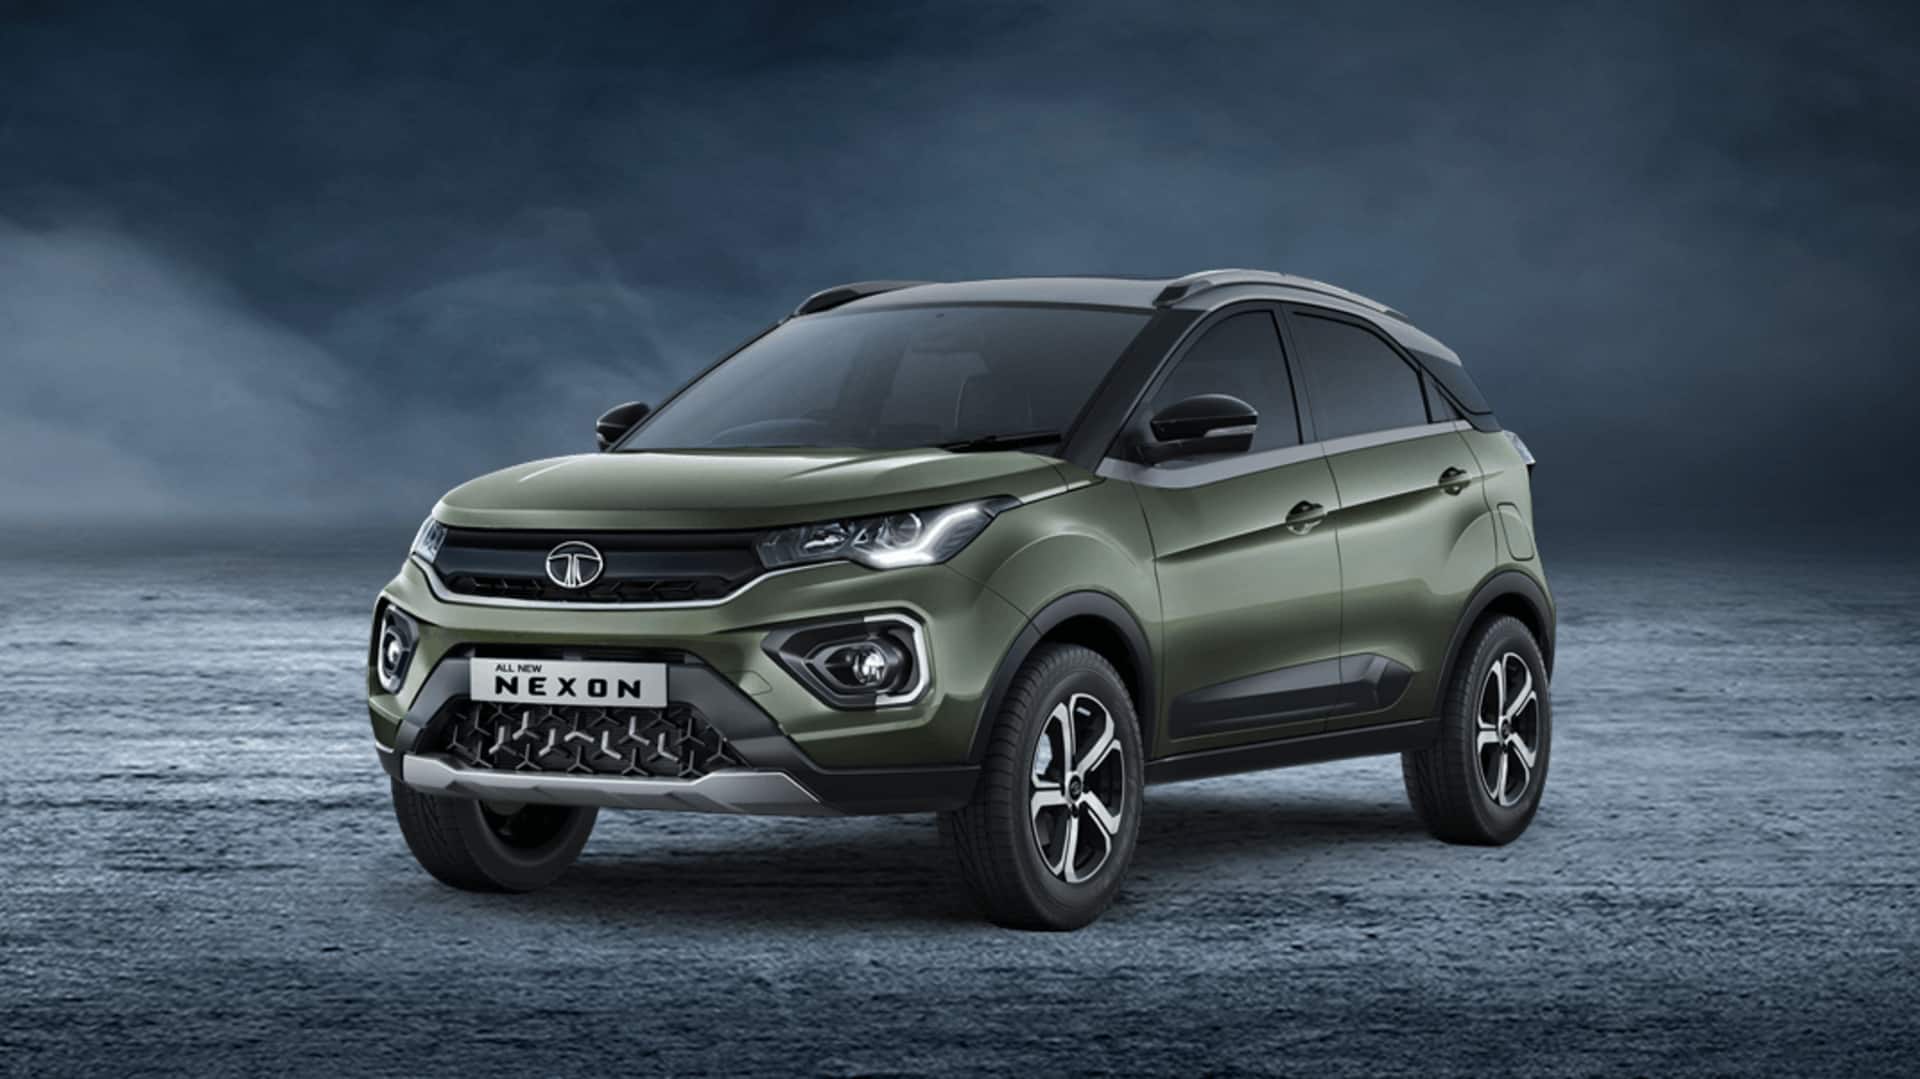 2024 Tata Nexon v/s 2023 model: What are the differences